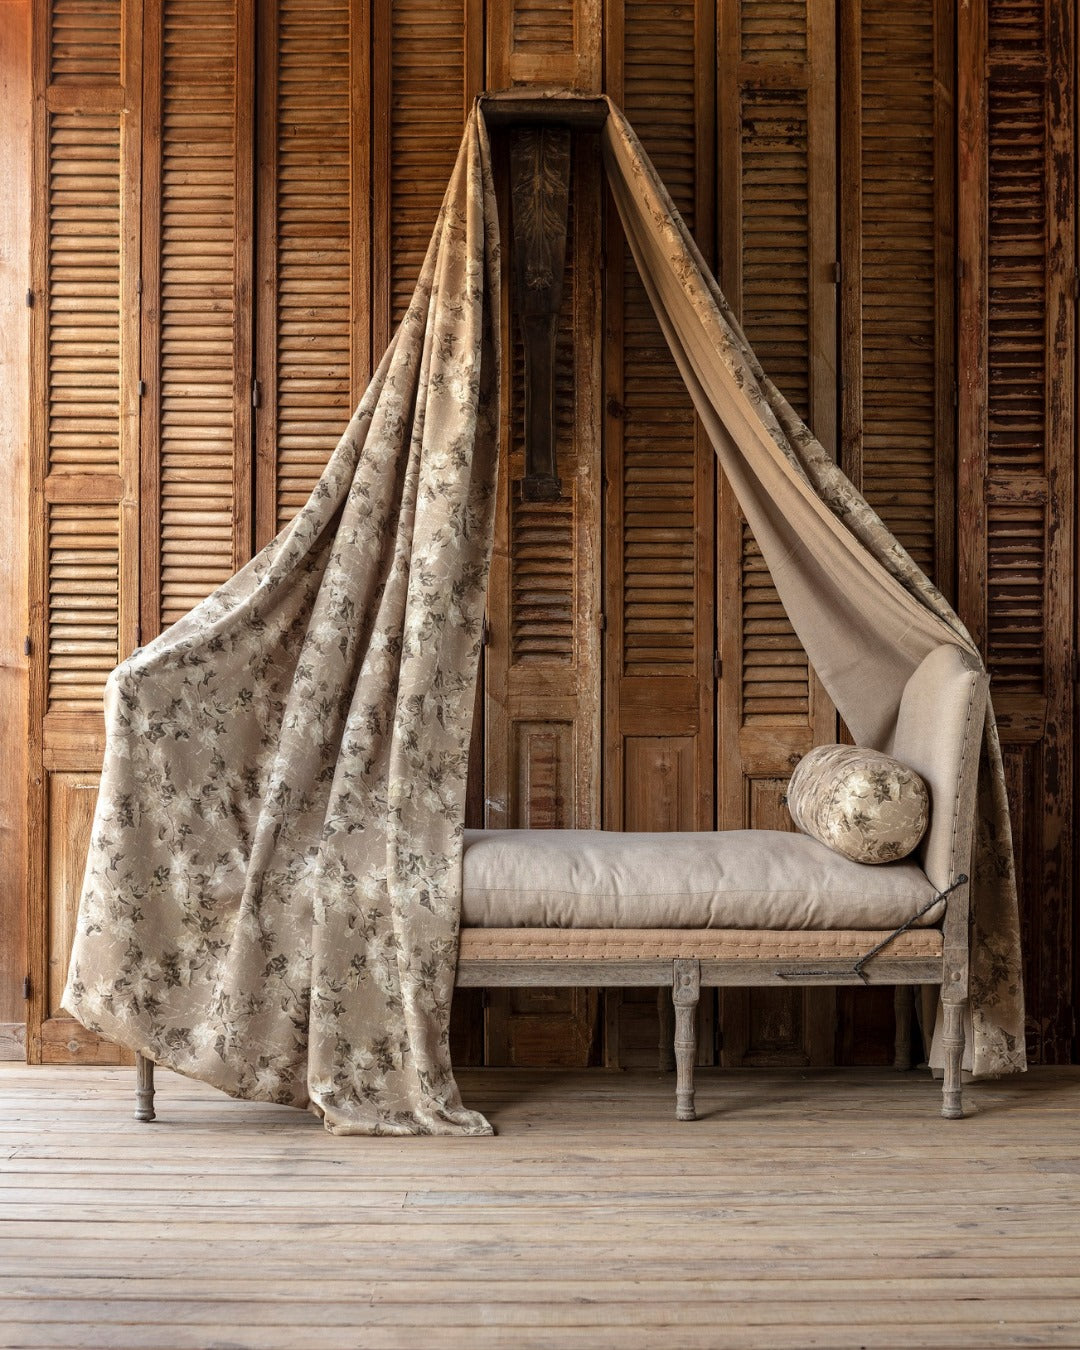 Vintage Style burlap Daybed for sale, Antique Burlap Daybed for sale